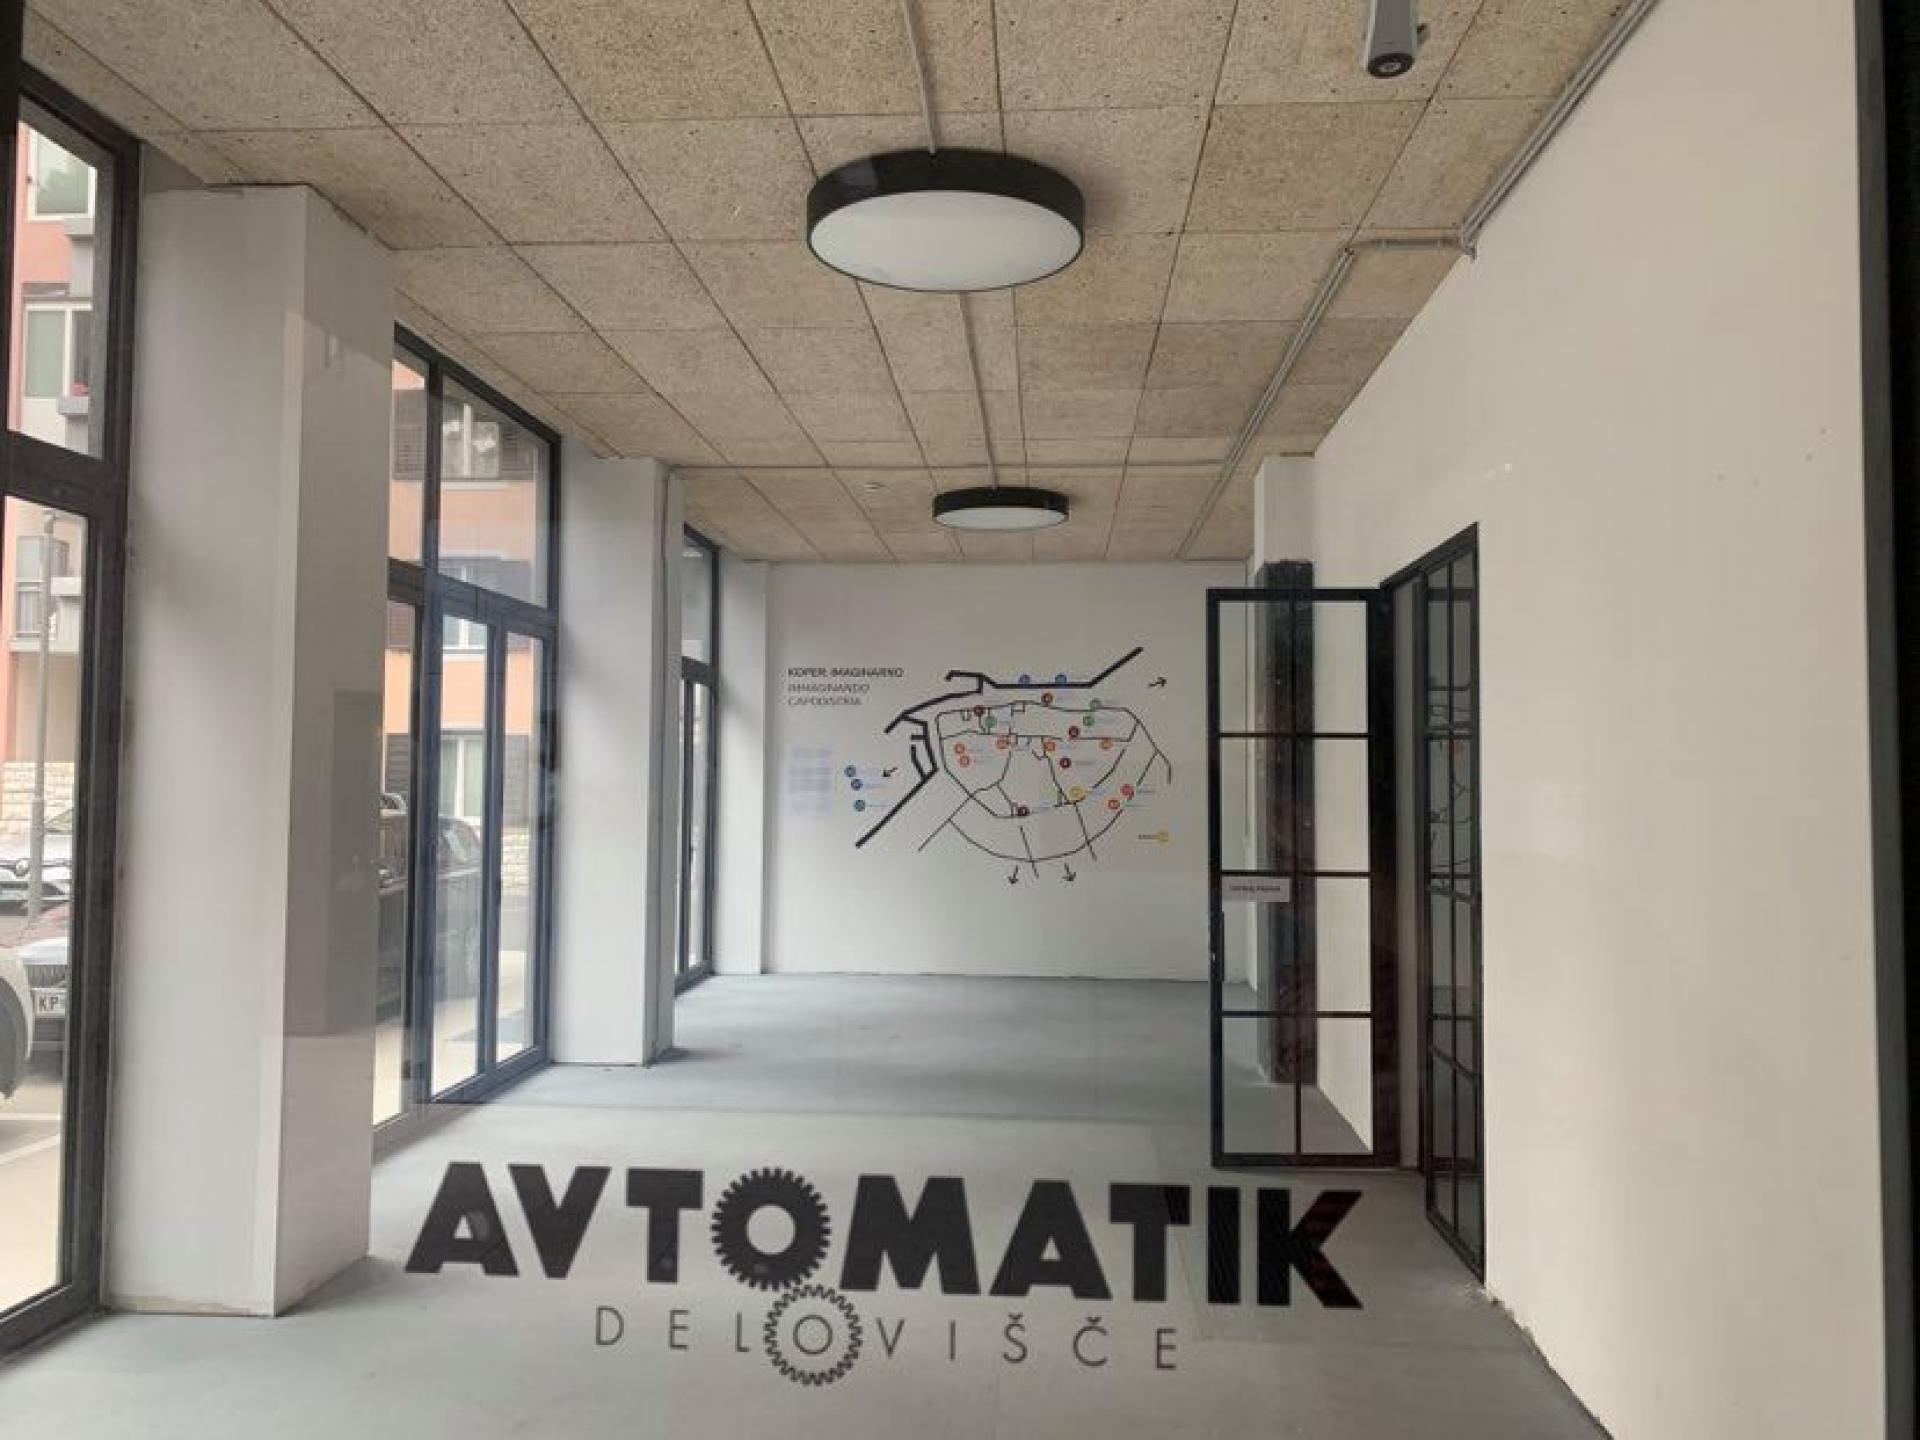 The investor opened up the possibility of organizing a first temporary space Avtomatik Workspace in Tomos presenting communities and stakeholders with a different way of communicating architecture. | Photo © Natalija Gajić